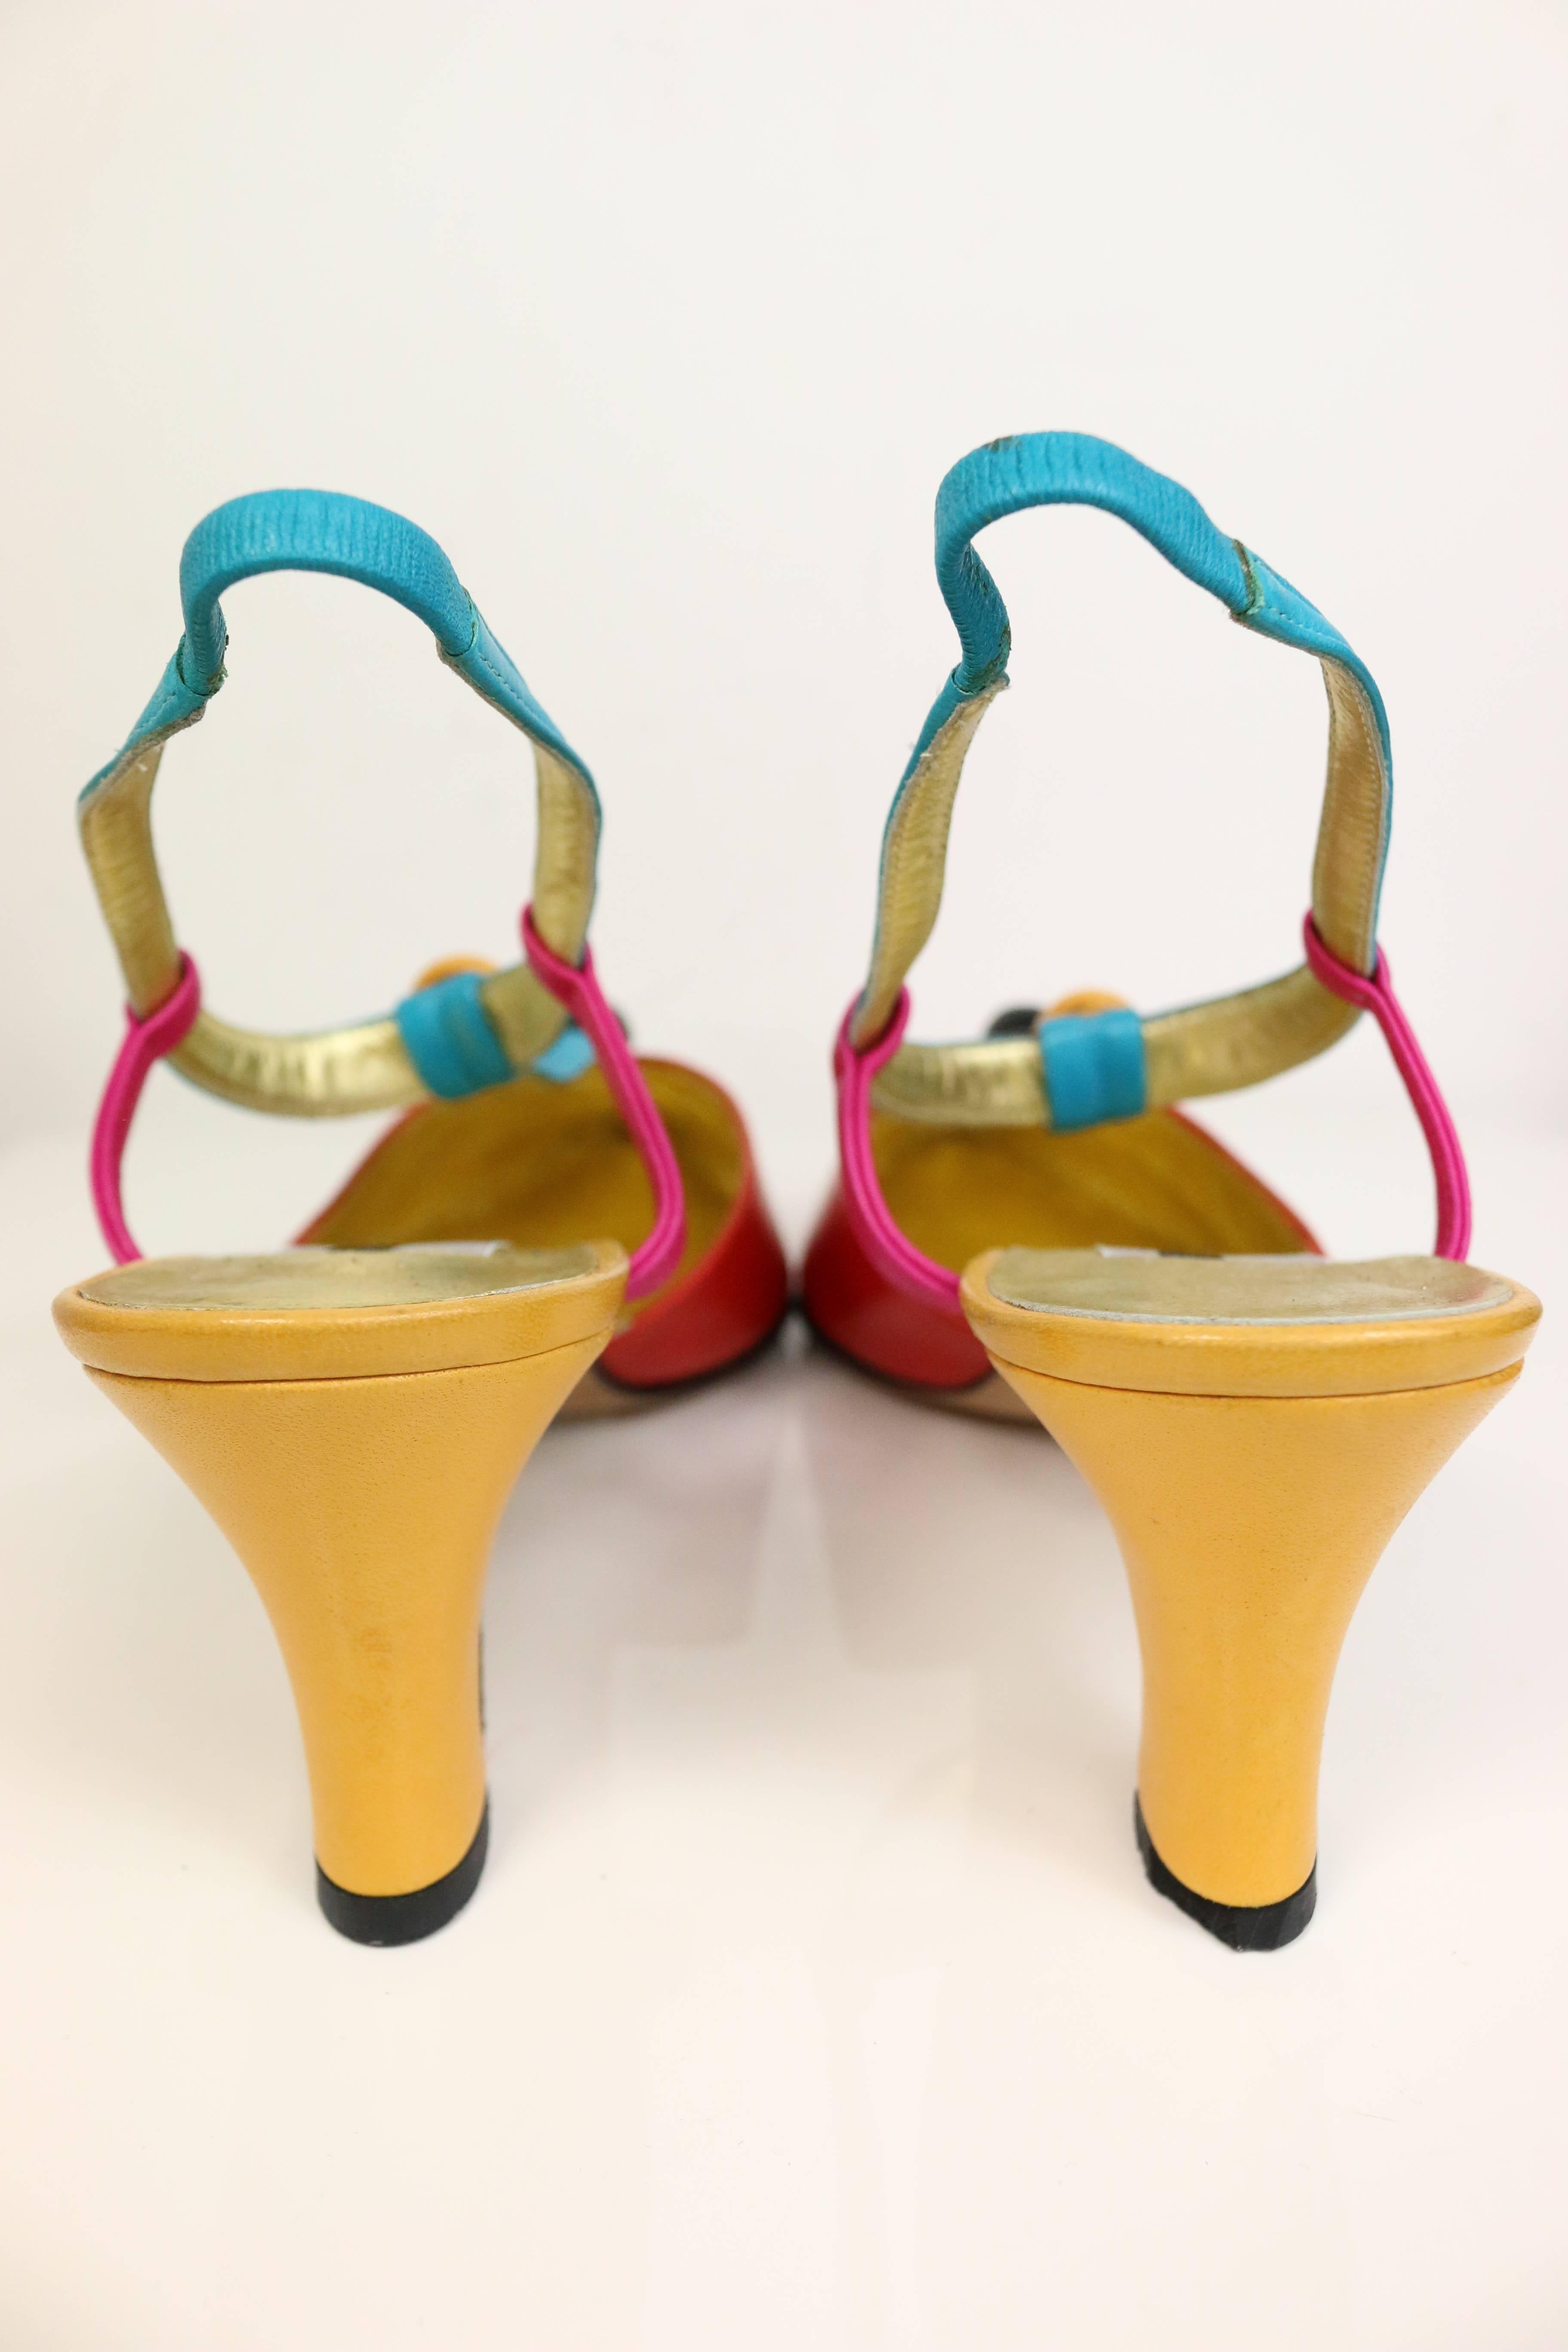 - Vintage 80s Pancaldi colour blocked(turquoise, red, pink, yellow, black) leather slingback shoes. 

- Size 37.5 

- Made in Italy. 

